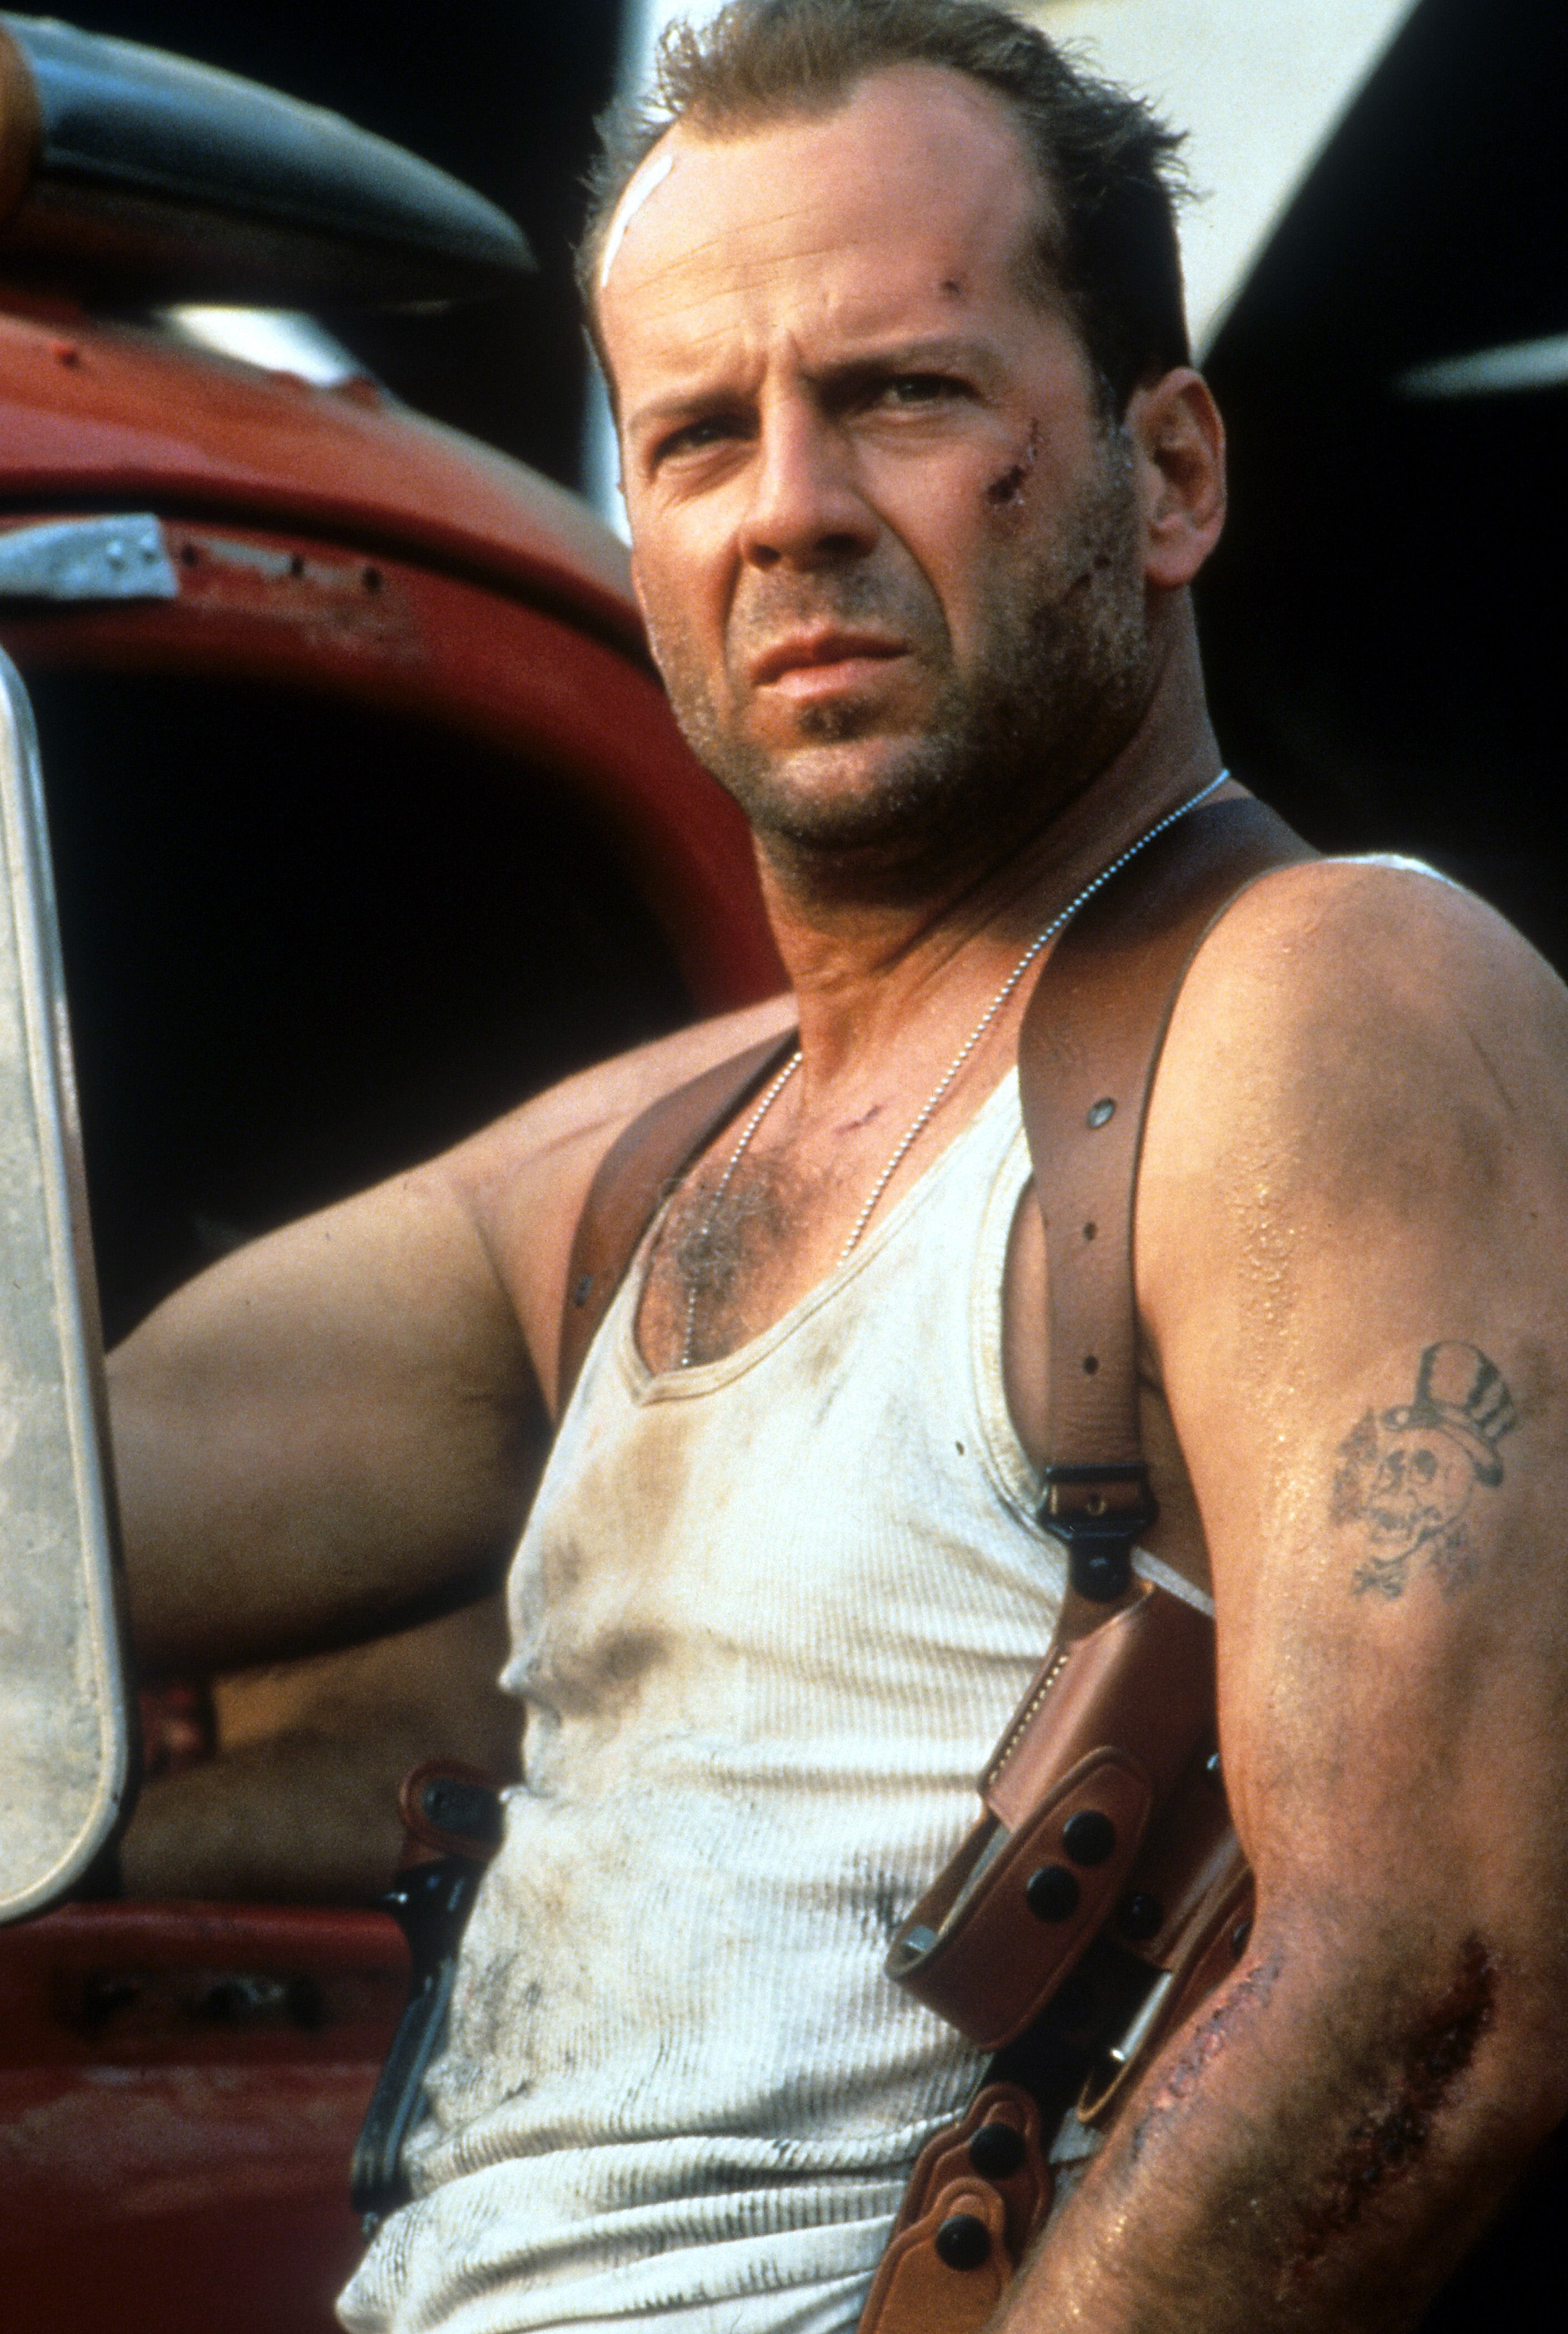 Bruce Willis wounded and disheveled in a scene from the film Die Hard: With a Vengeance